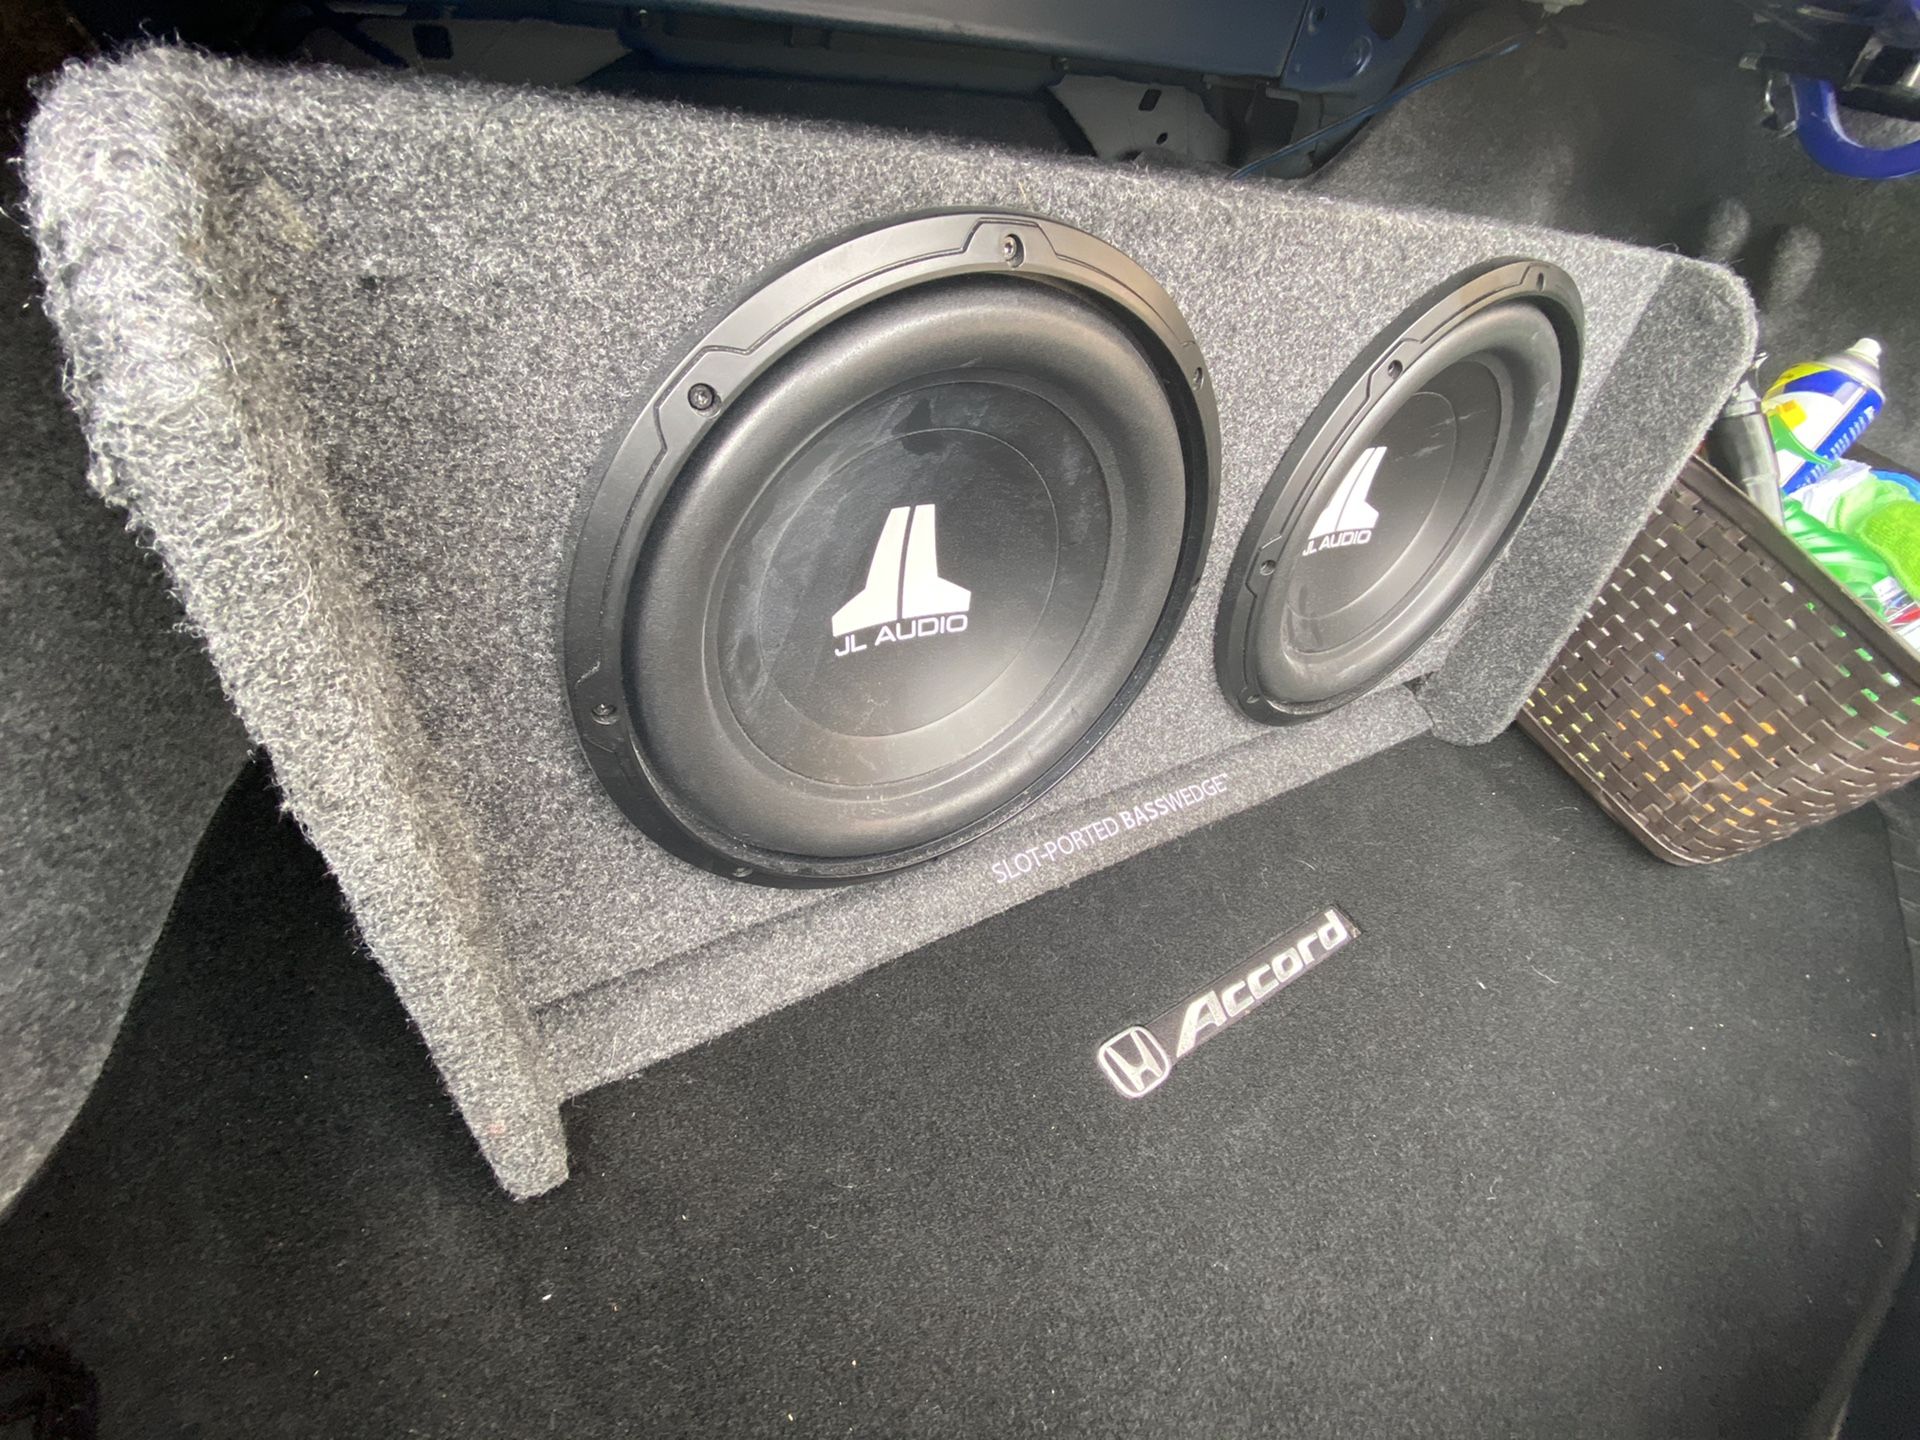 2 12 JL Audio Subwoofers only used for 3 months